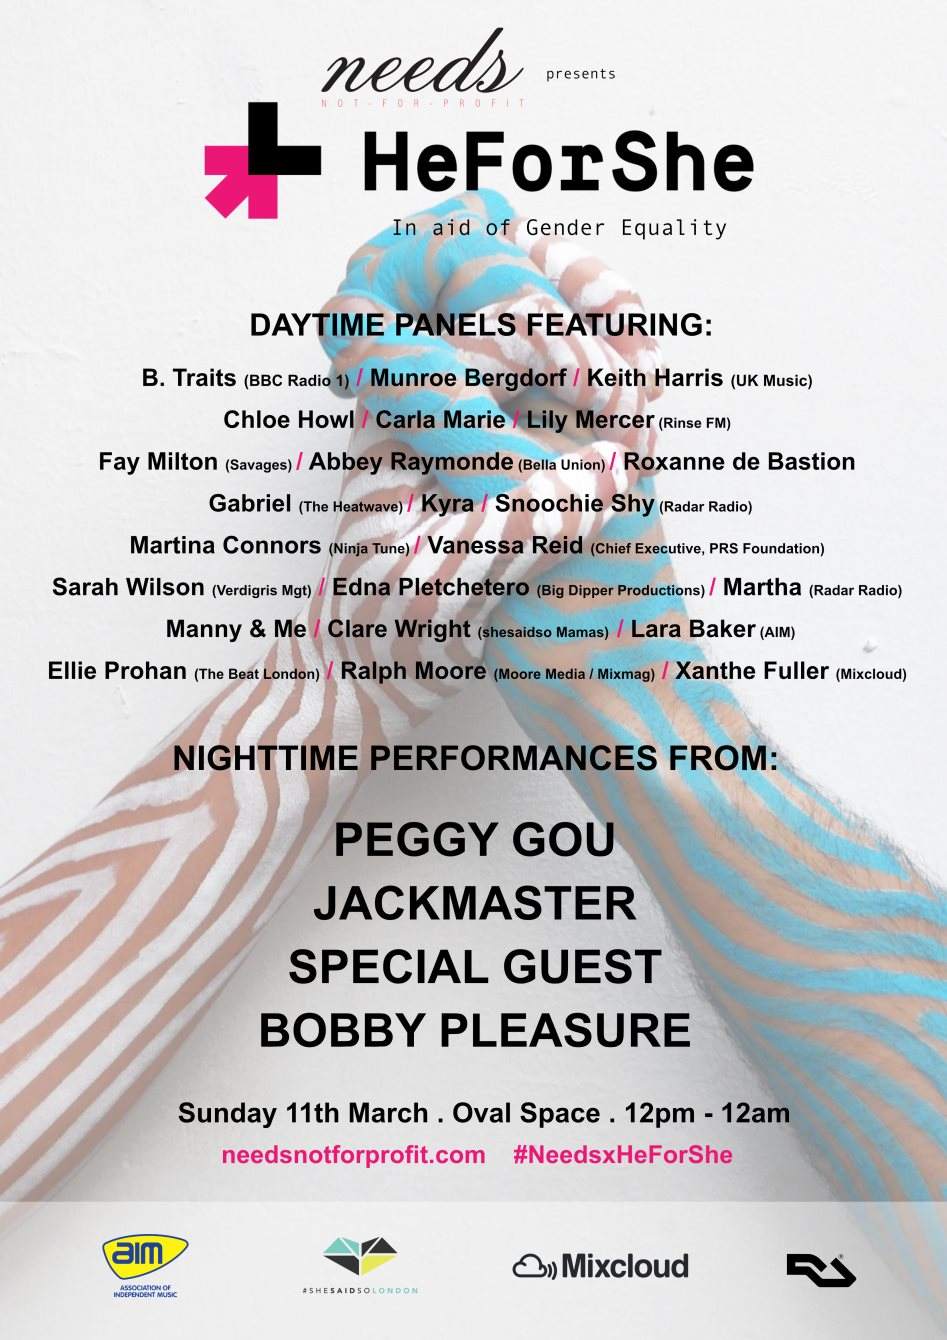 Needs​ ​x​ ​HeForShe with Jackmaster, Peggy Gou, B Traits, Munroe Bergdorf & Many More - フライヤー表